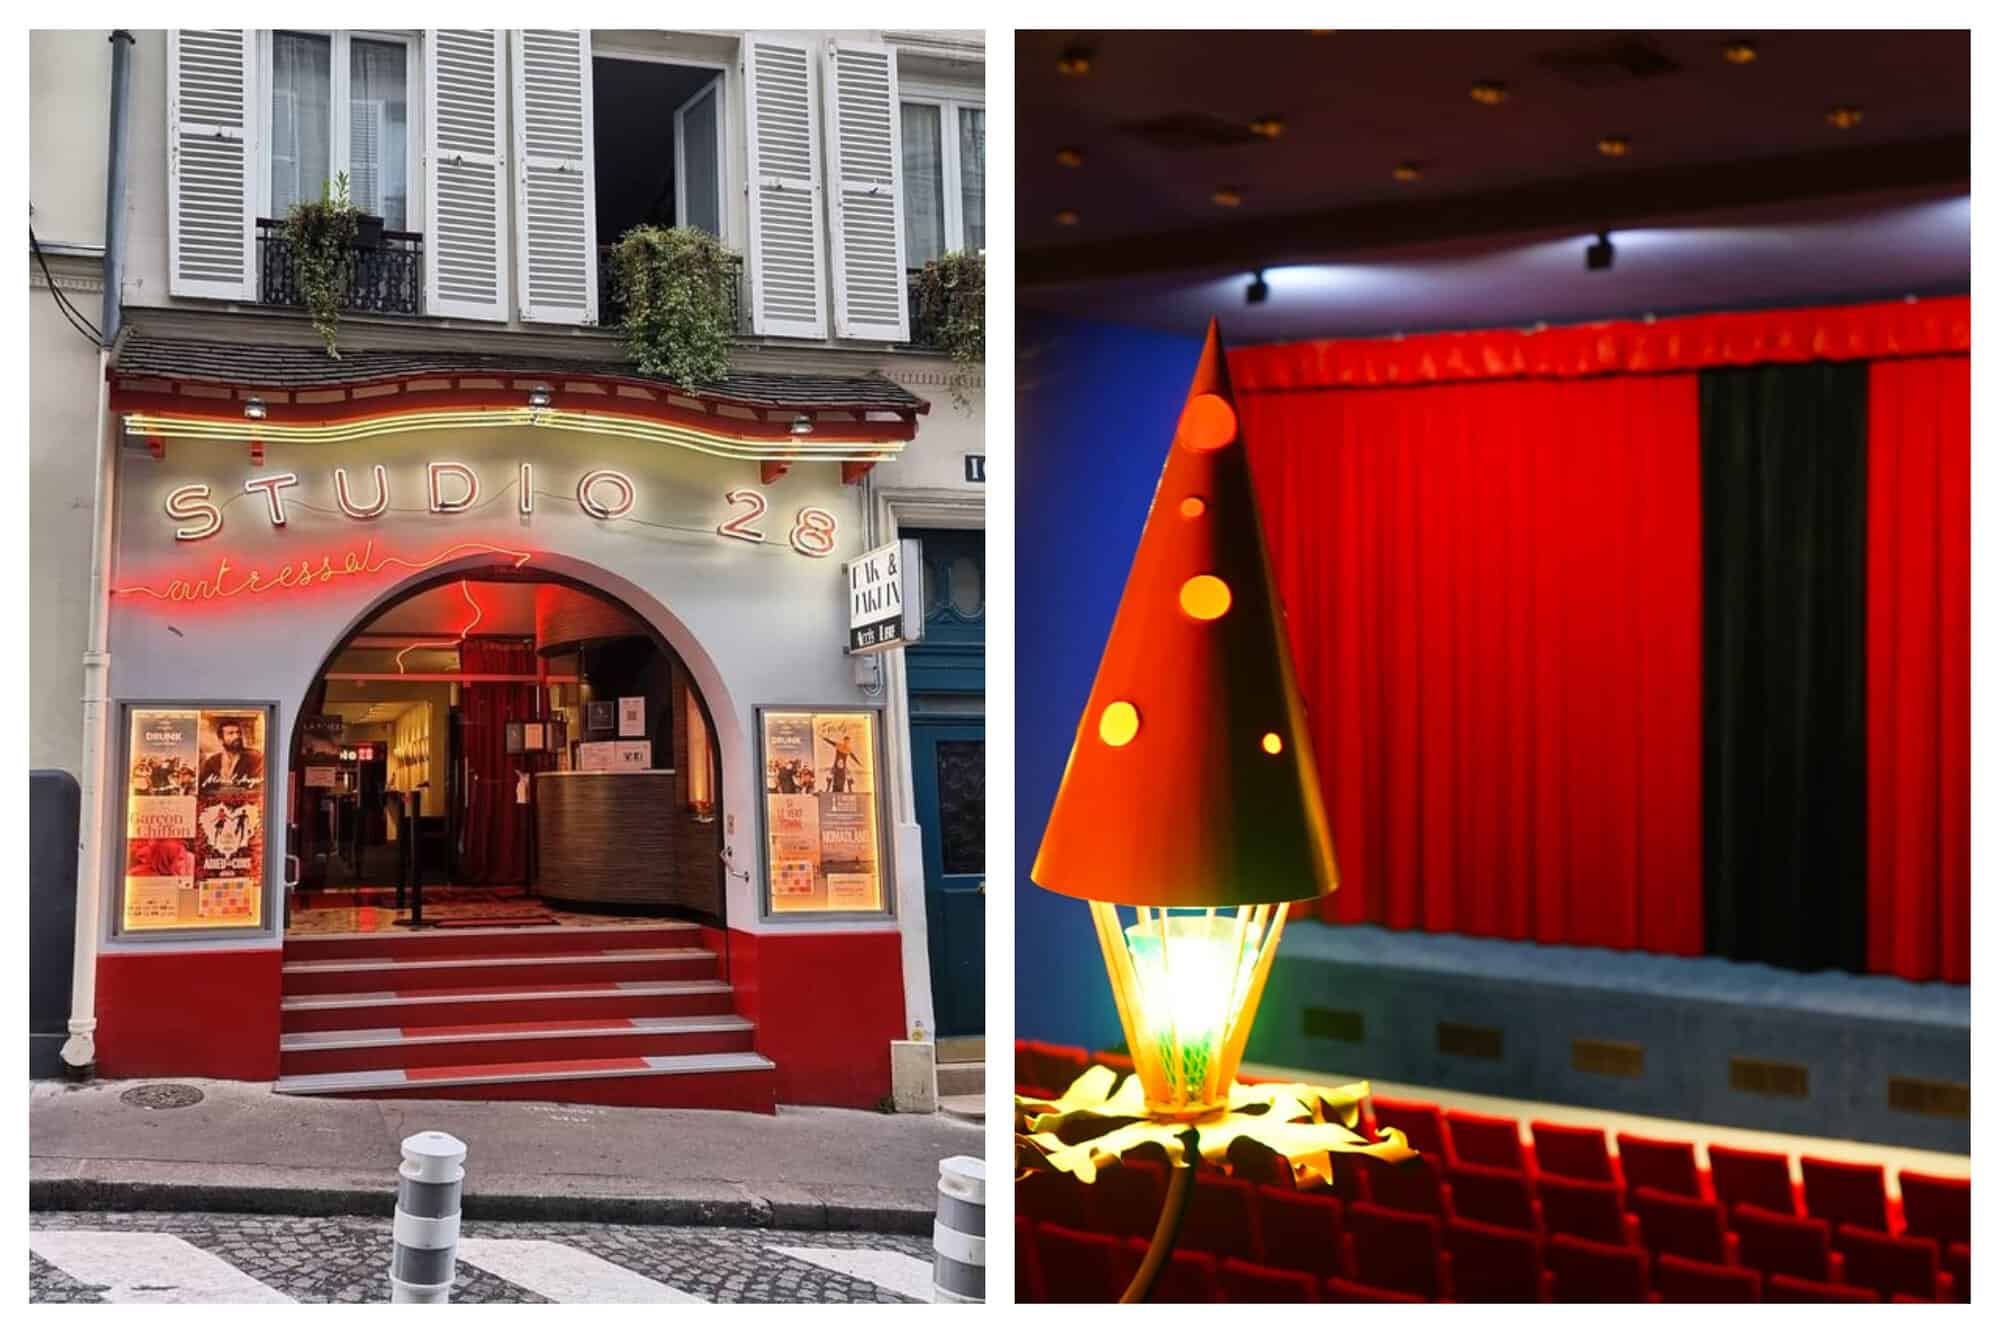 Left: A picture of the building face of the cinema Studio 28 in Montmartre, Paris. Right: Right: A picture of the cinema inside Studio 28 in montmartre, with red velvet curtains and seats.